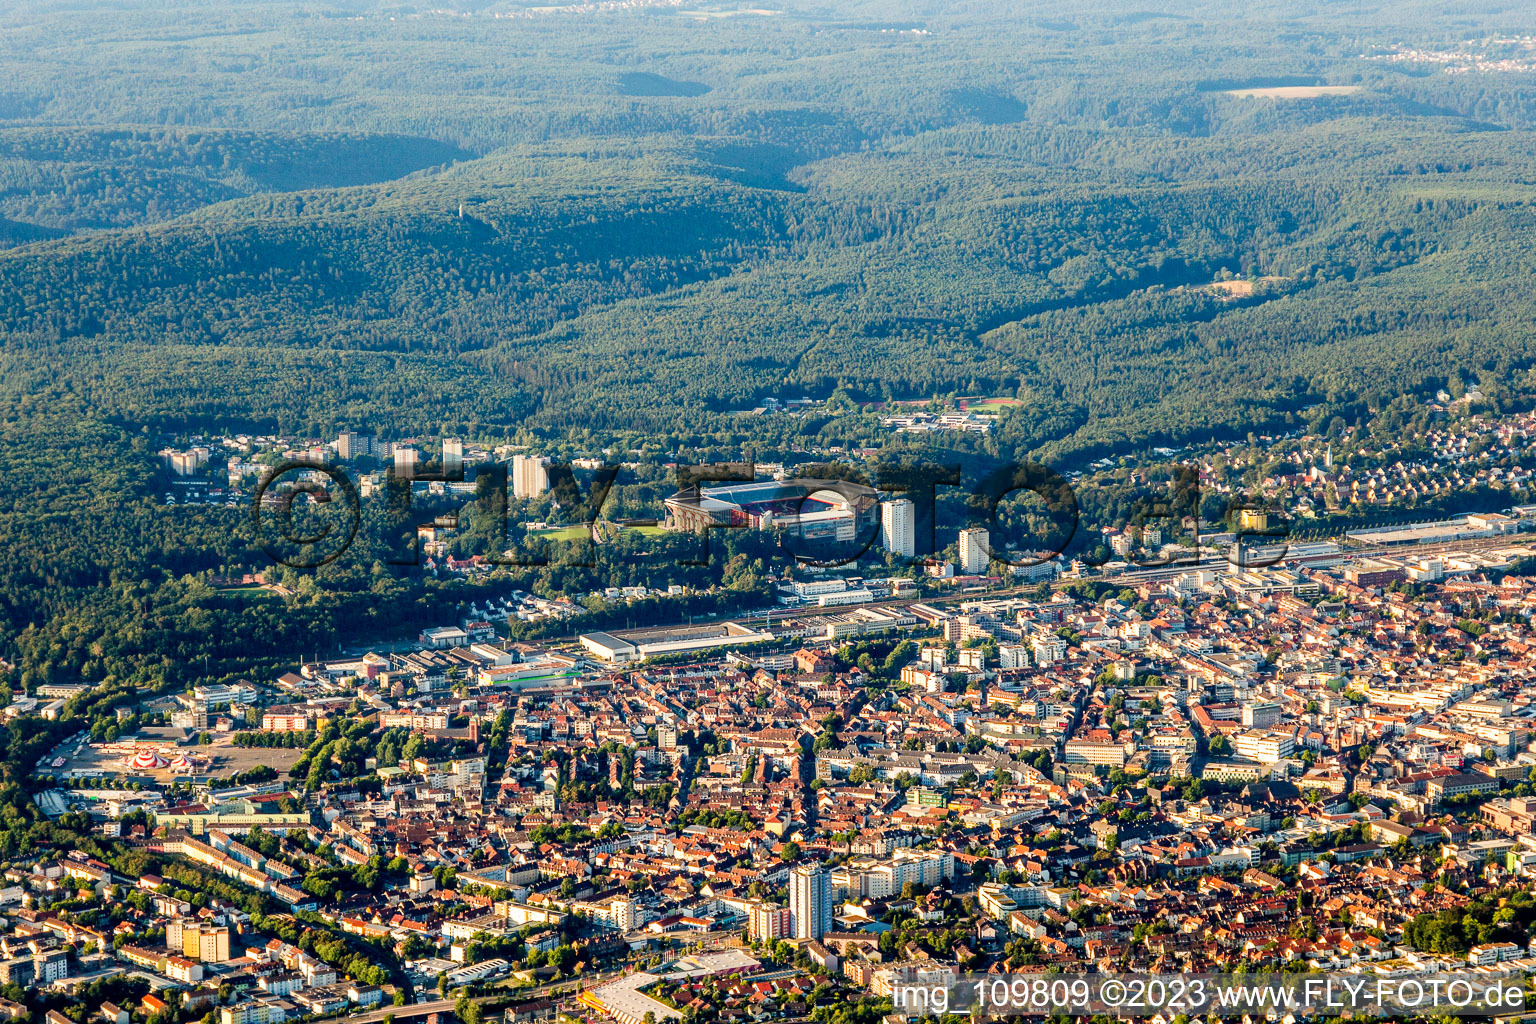 Aerial photograpy of Fritz Walter Stadium in Kaiserslautern in the state Rhineland-Palatinate, Germany